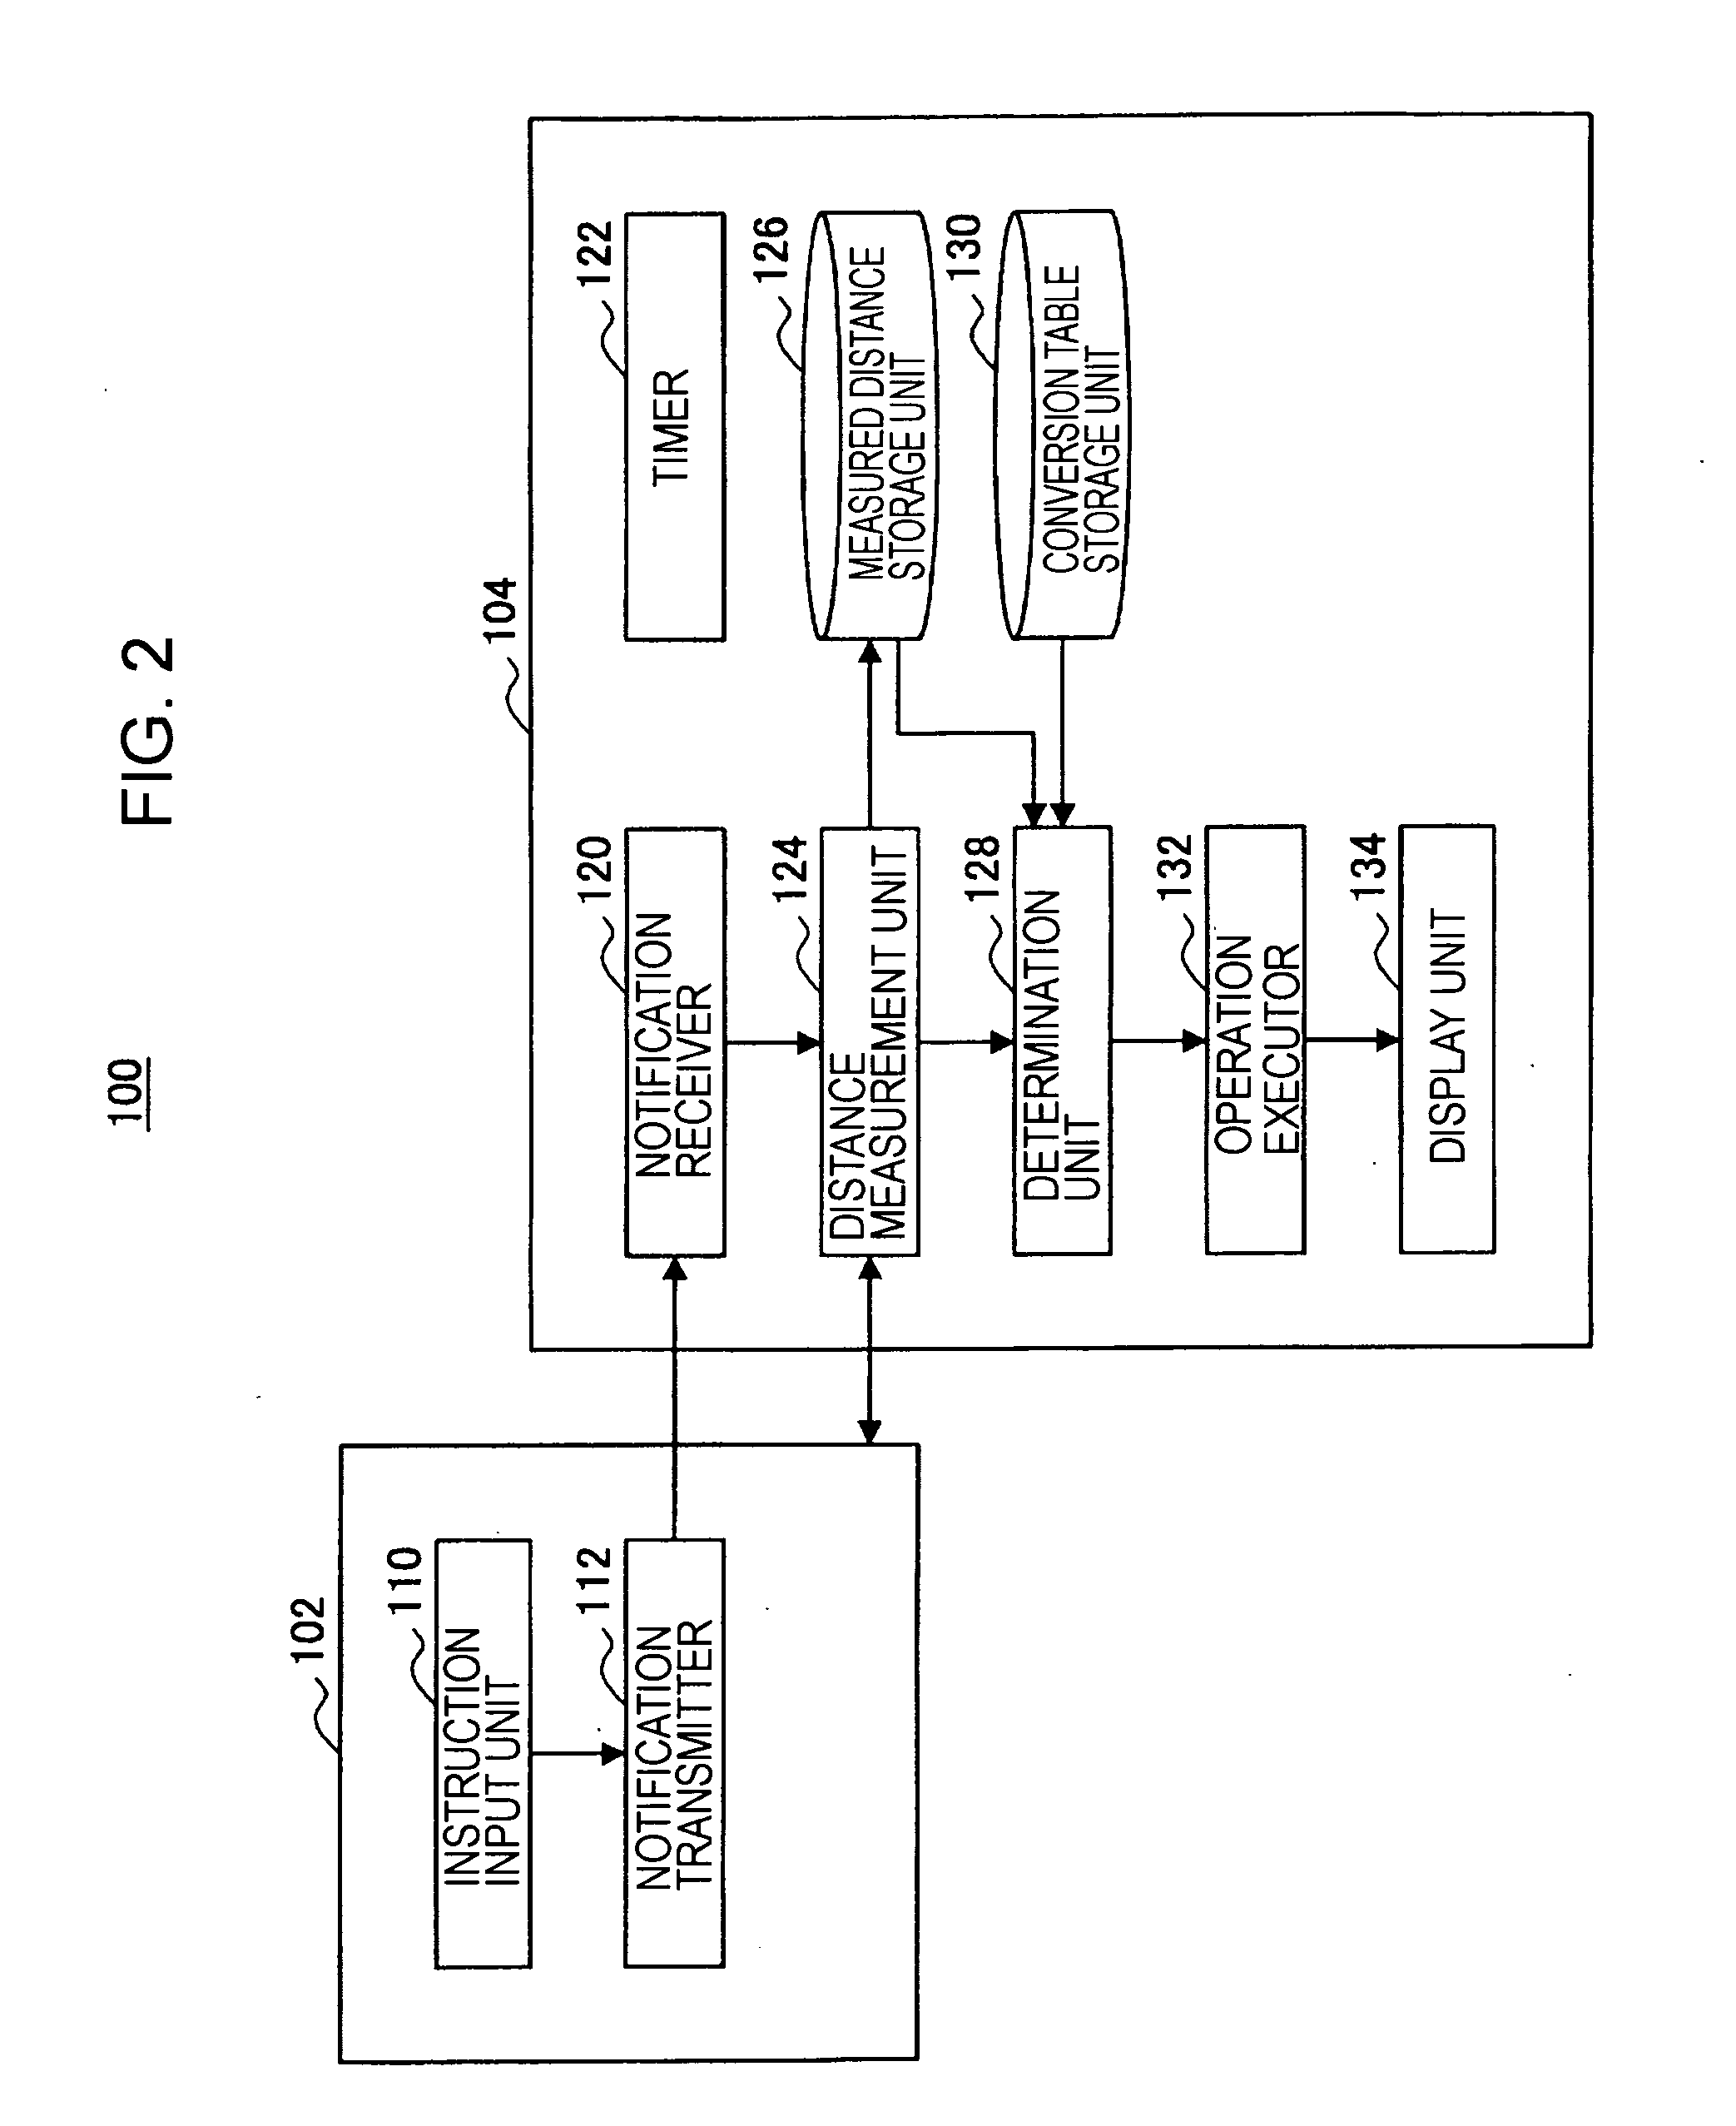 Remote control system, remote controller, information processing apparatus, remote control method, information processing method, and computer program therefor